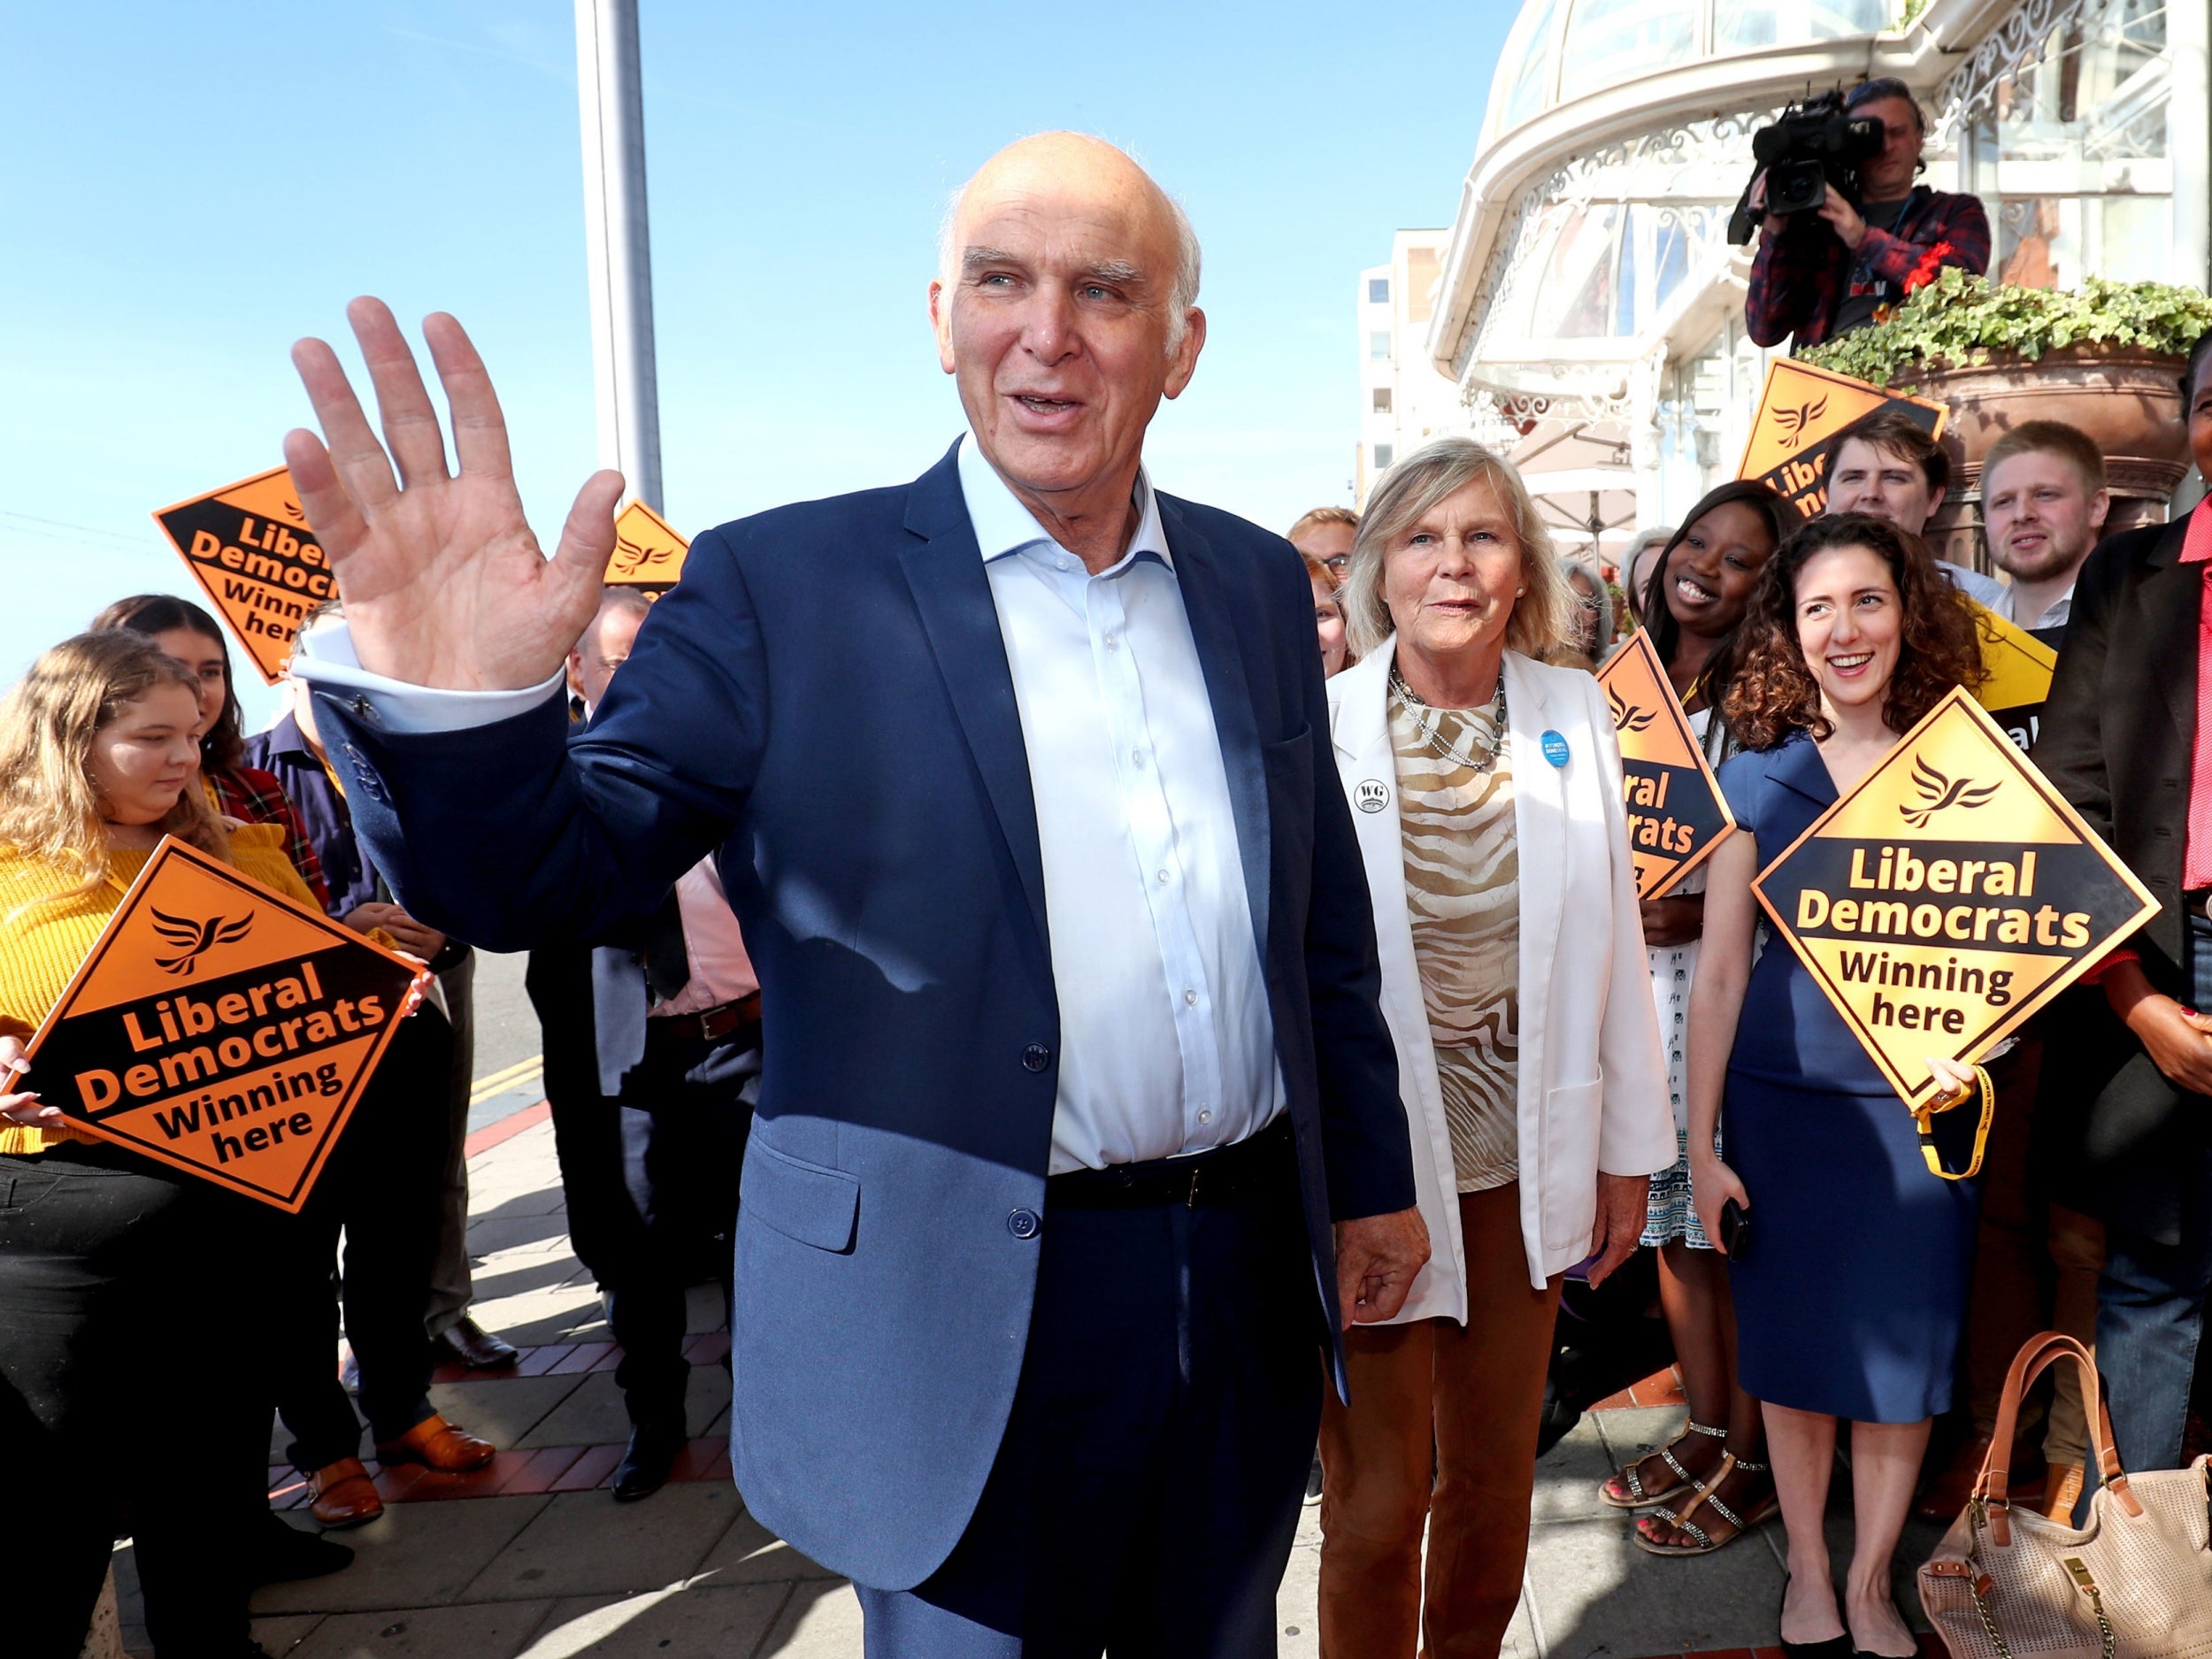 Sir Vince Cable arriving at the Liberal Democrats conference in Brighton